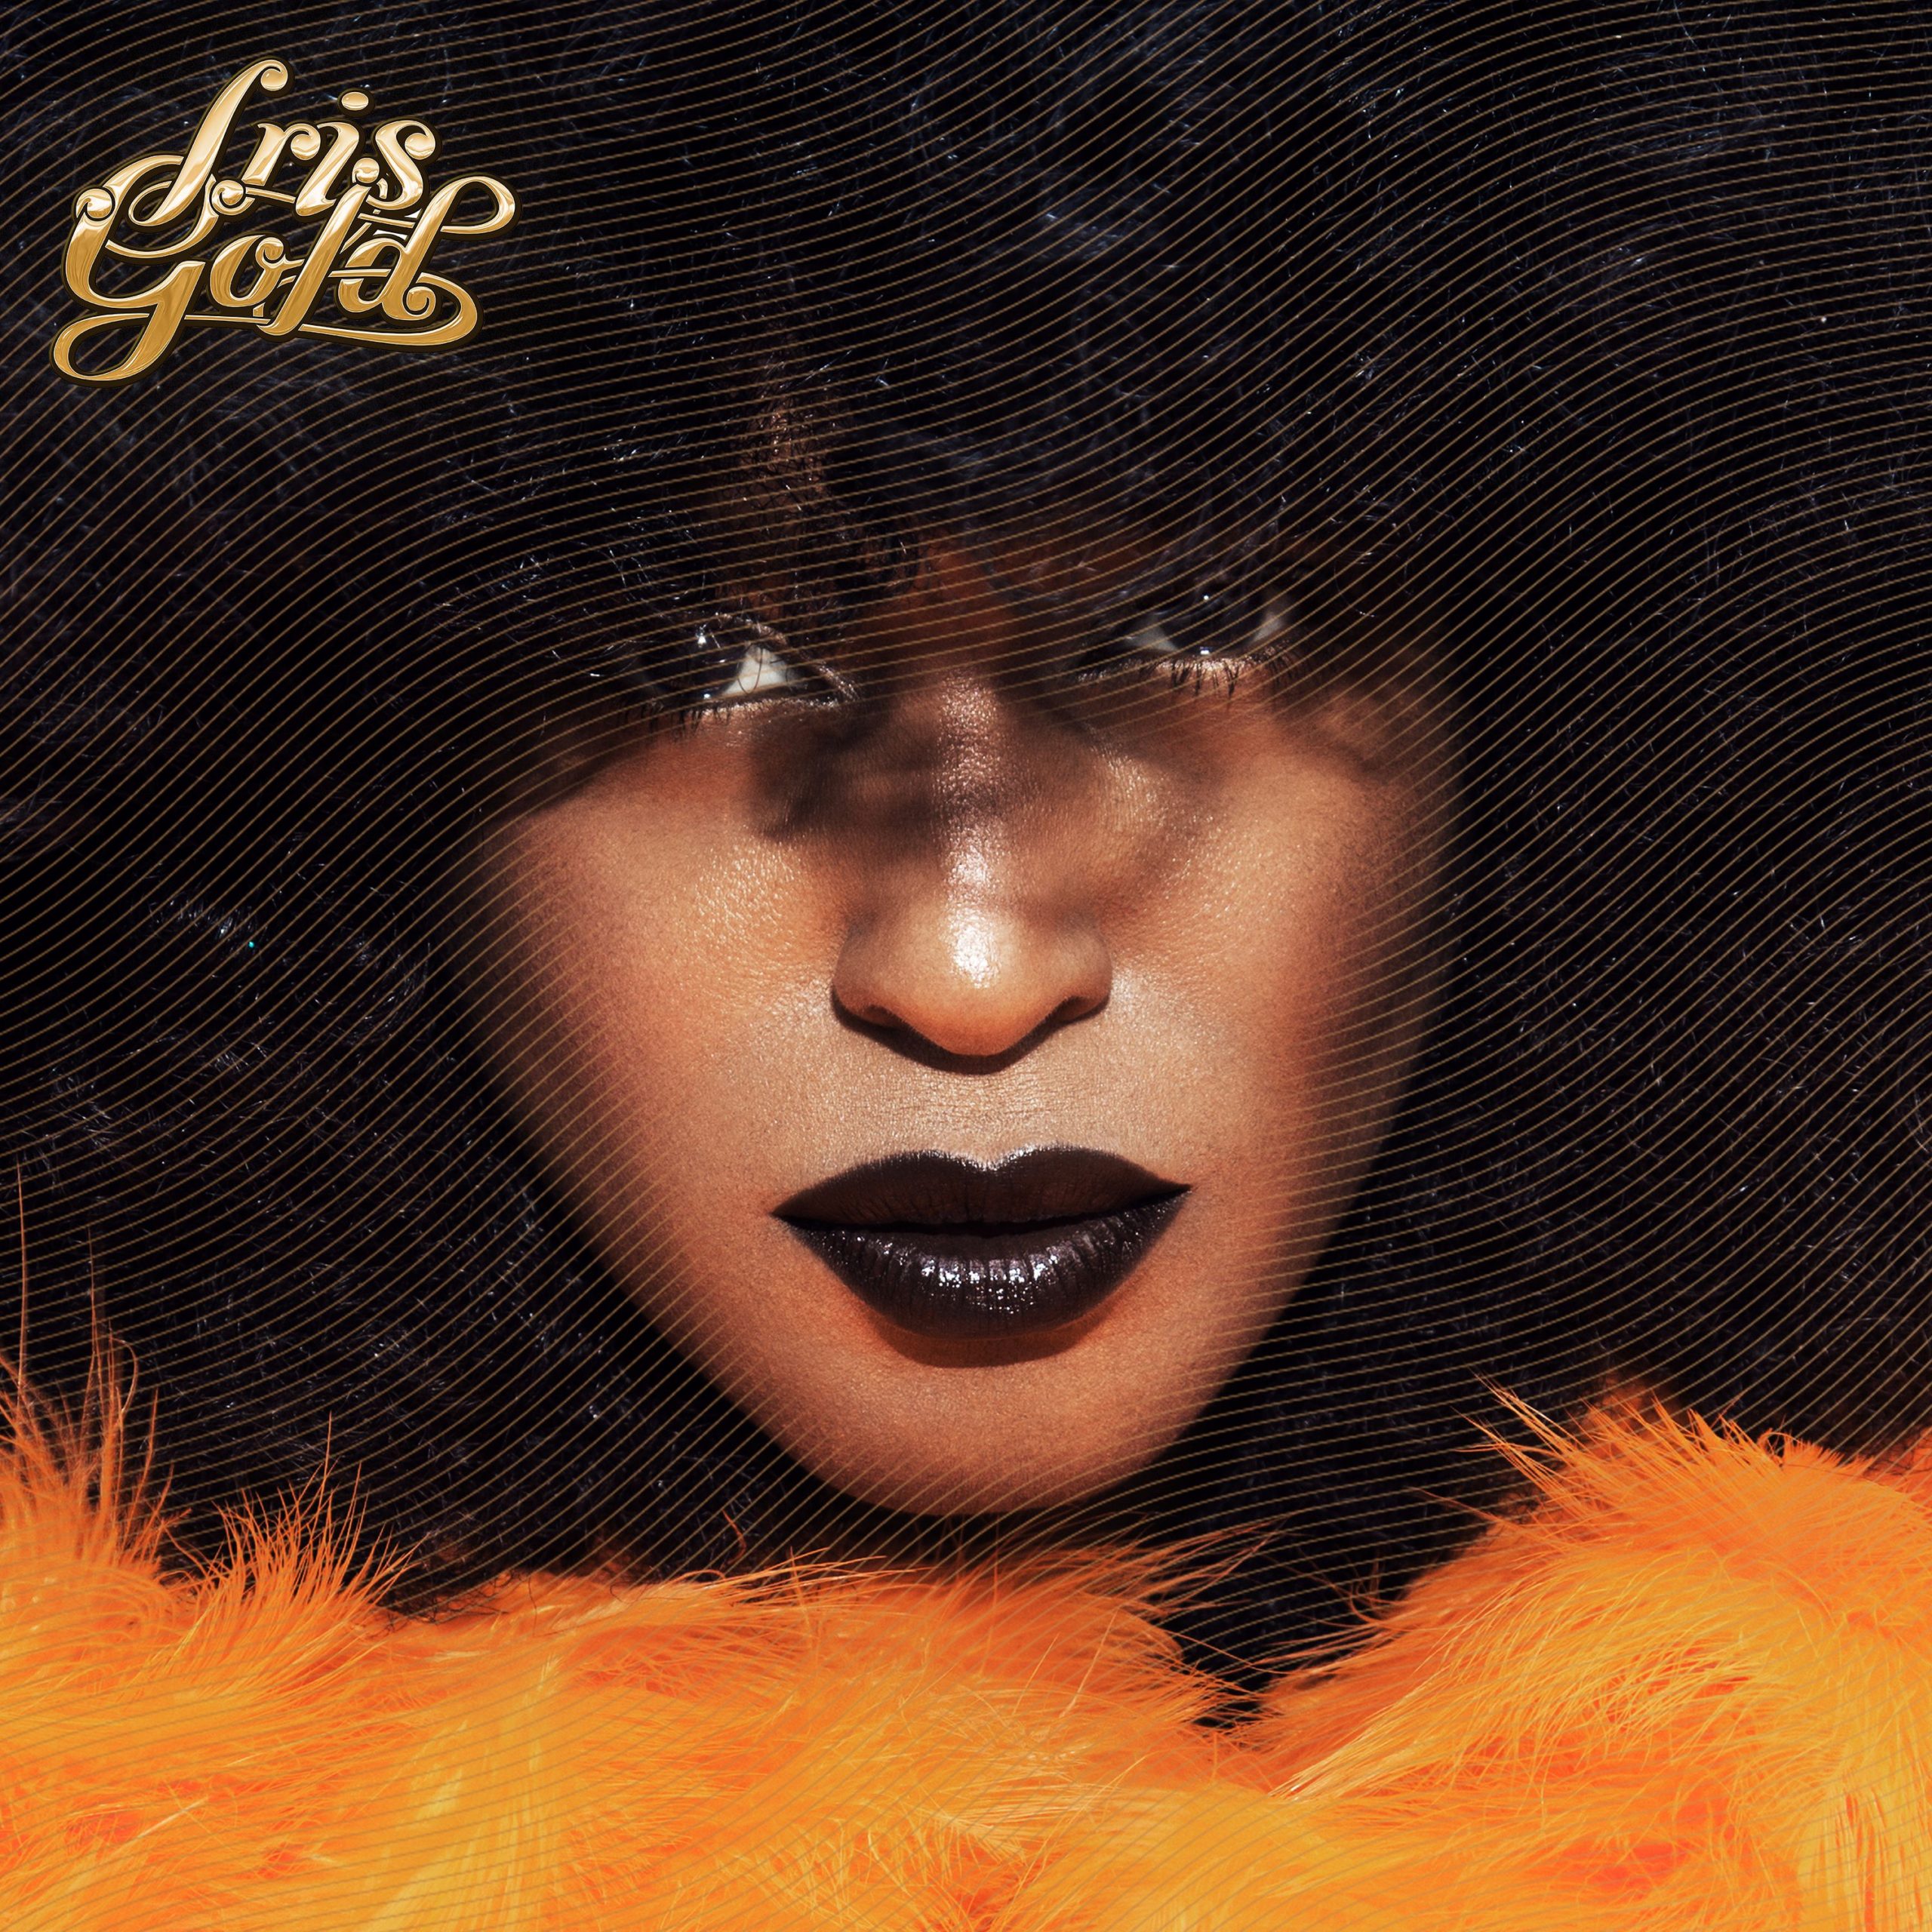 Iris Gold – “All I Really Know”